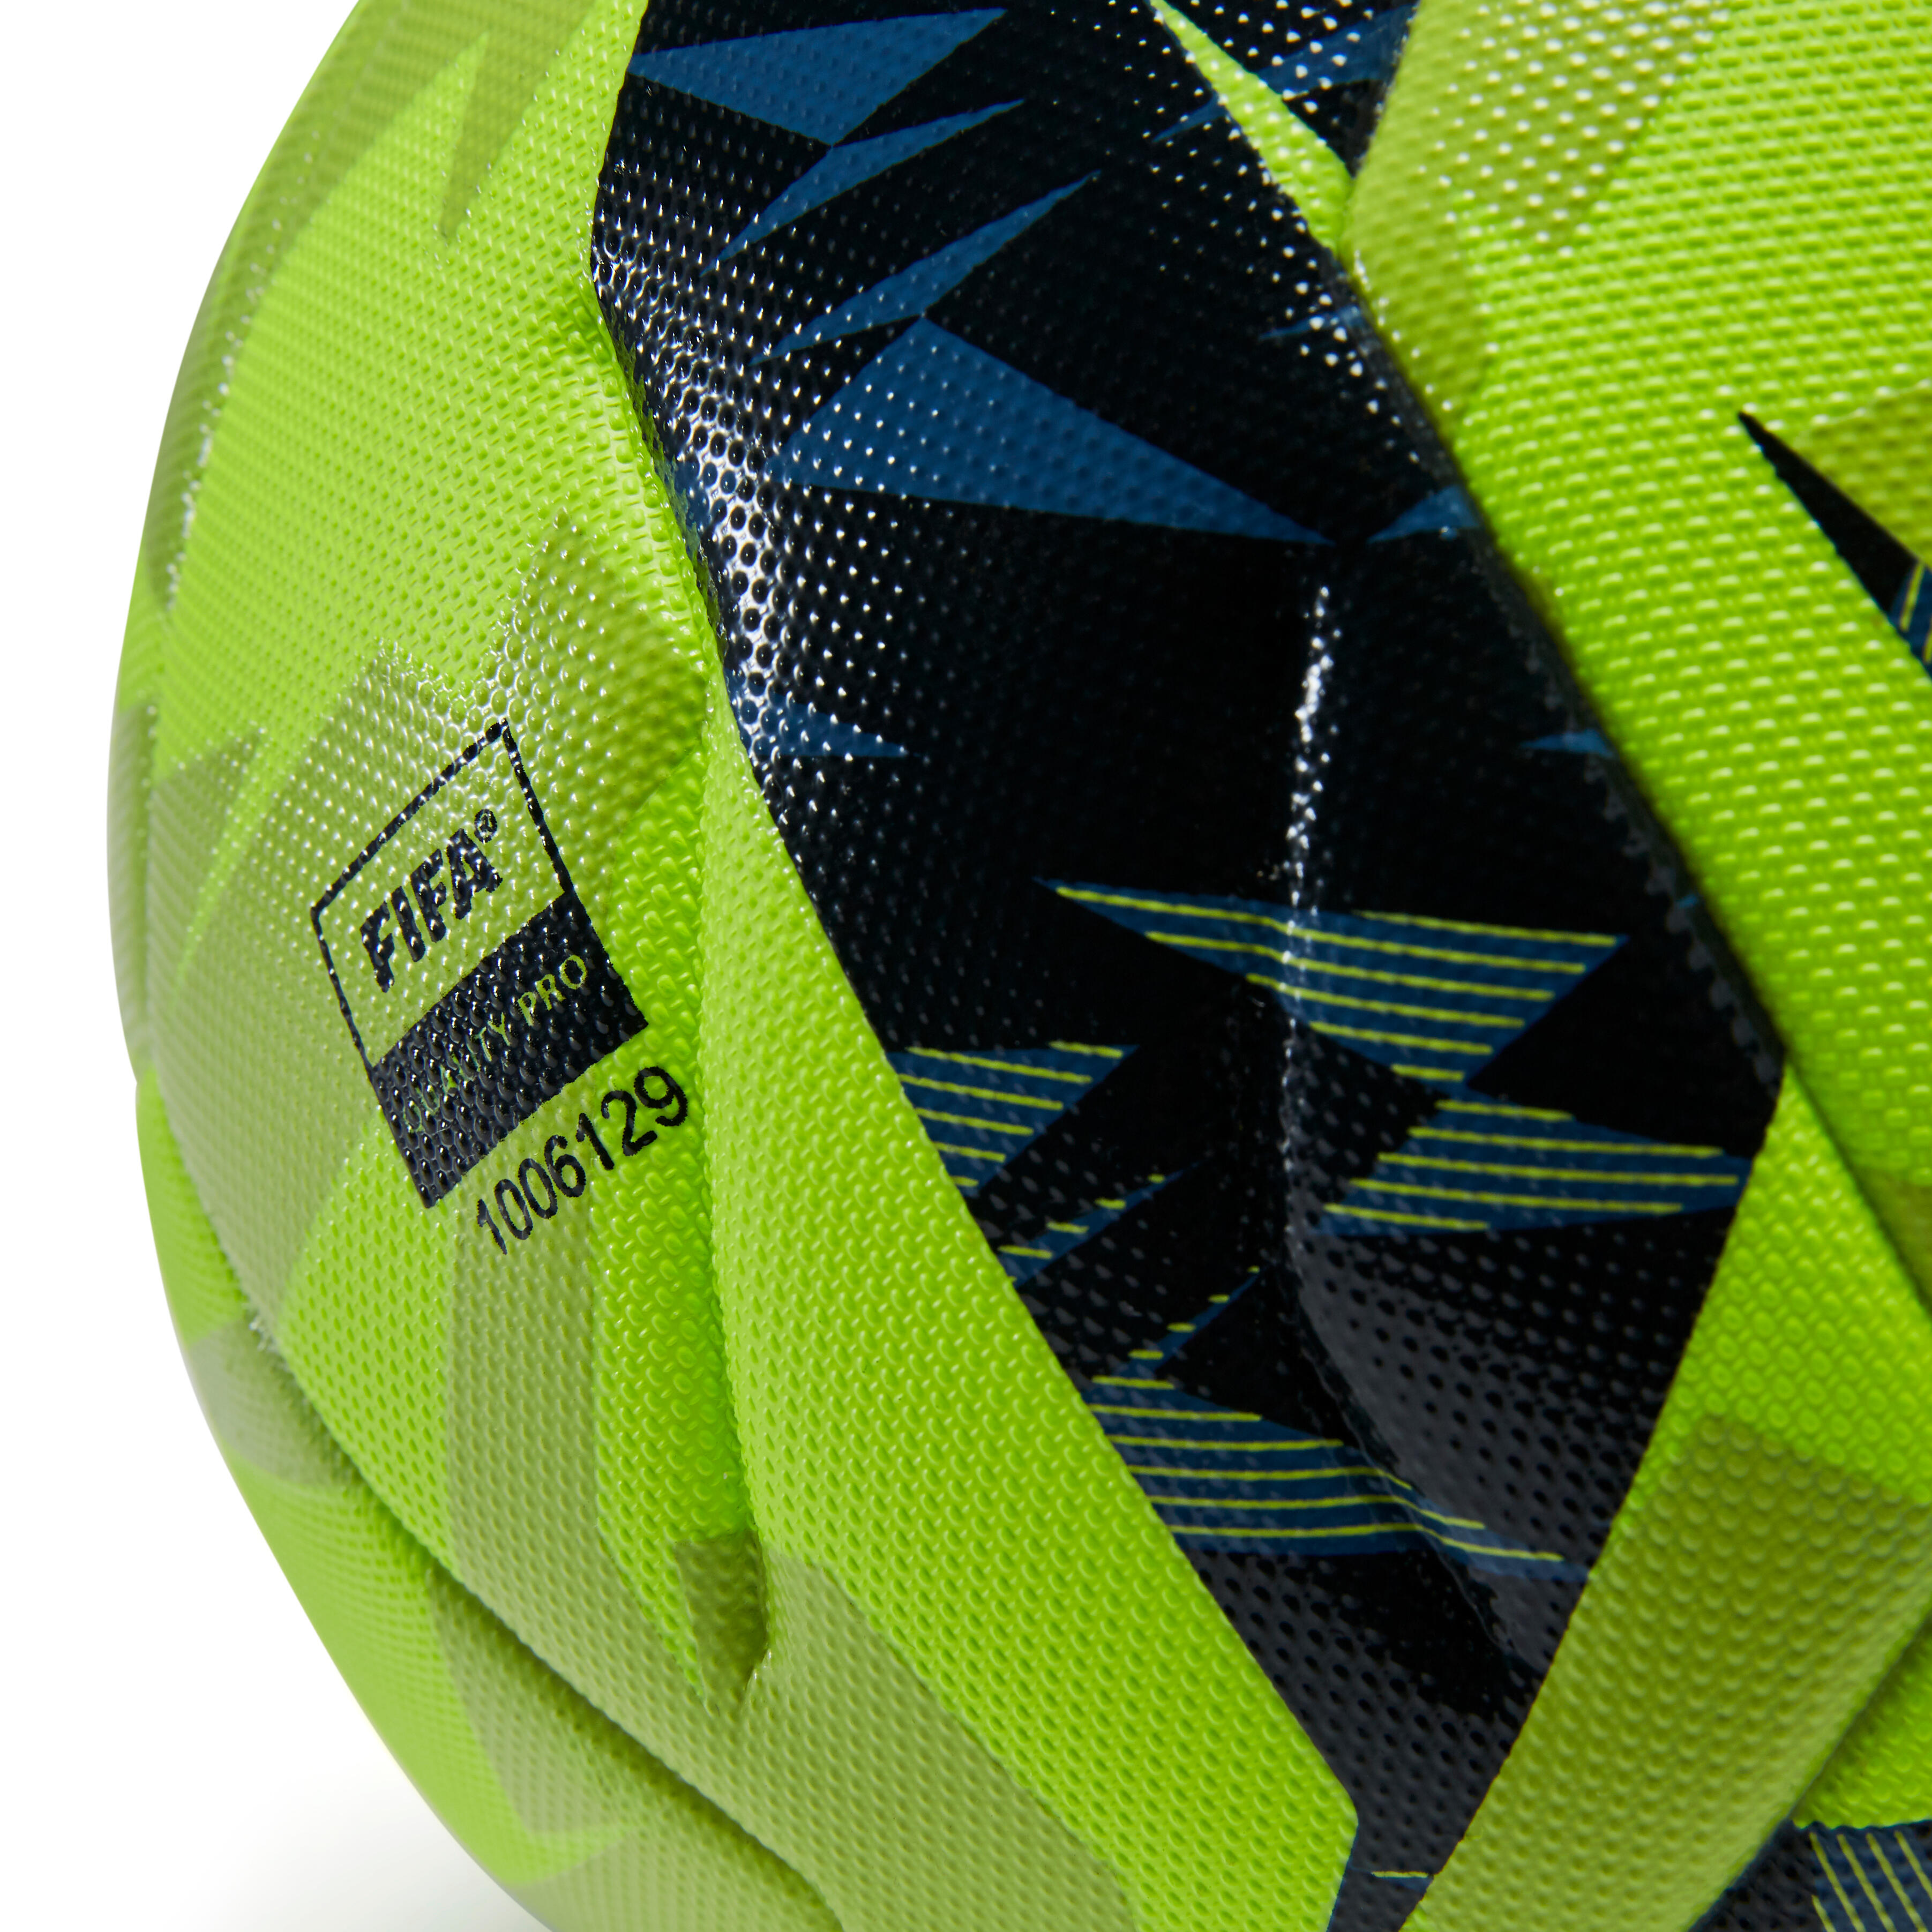 F 950 FIFA Quality Pro thermobonded soccer ball size 5 - KIPSTA